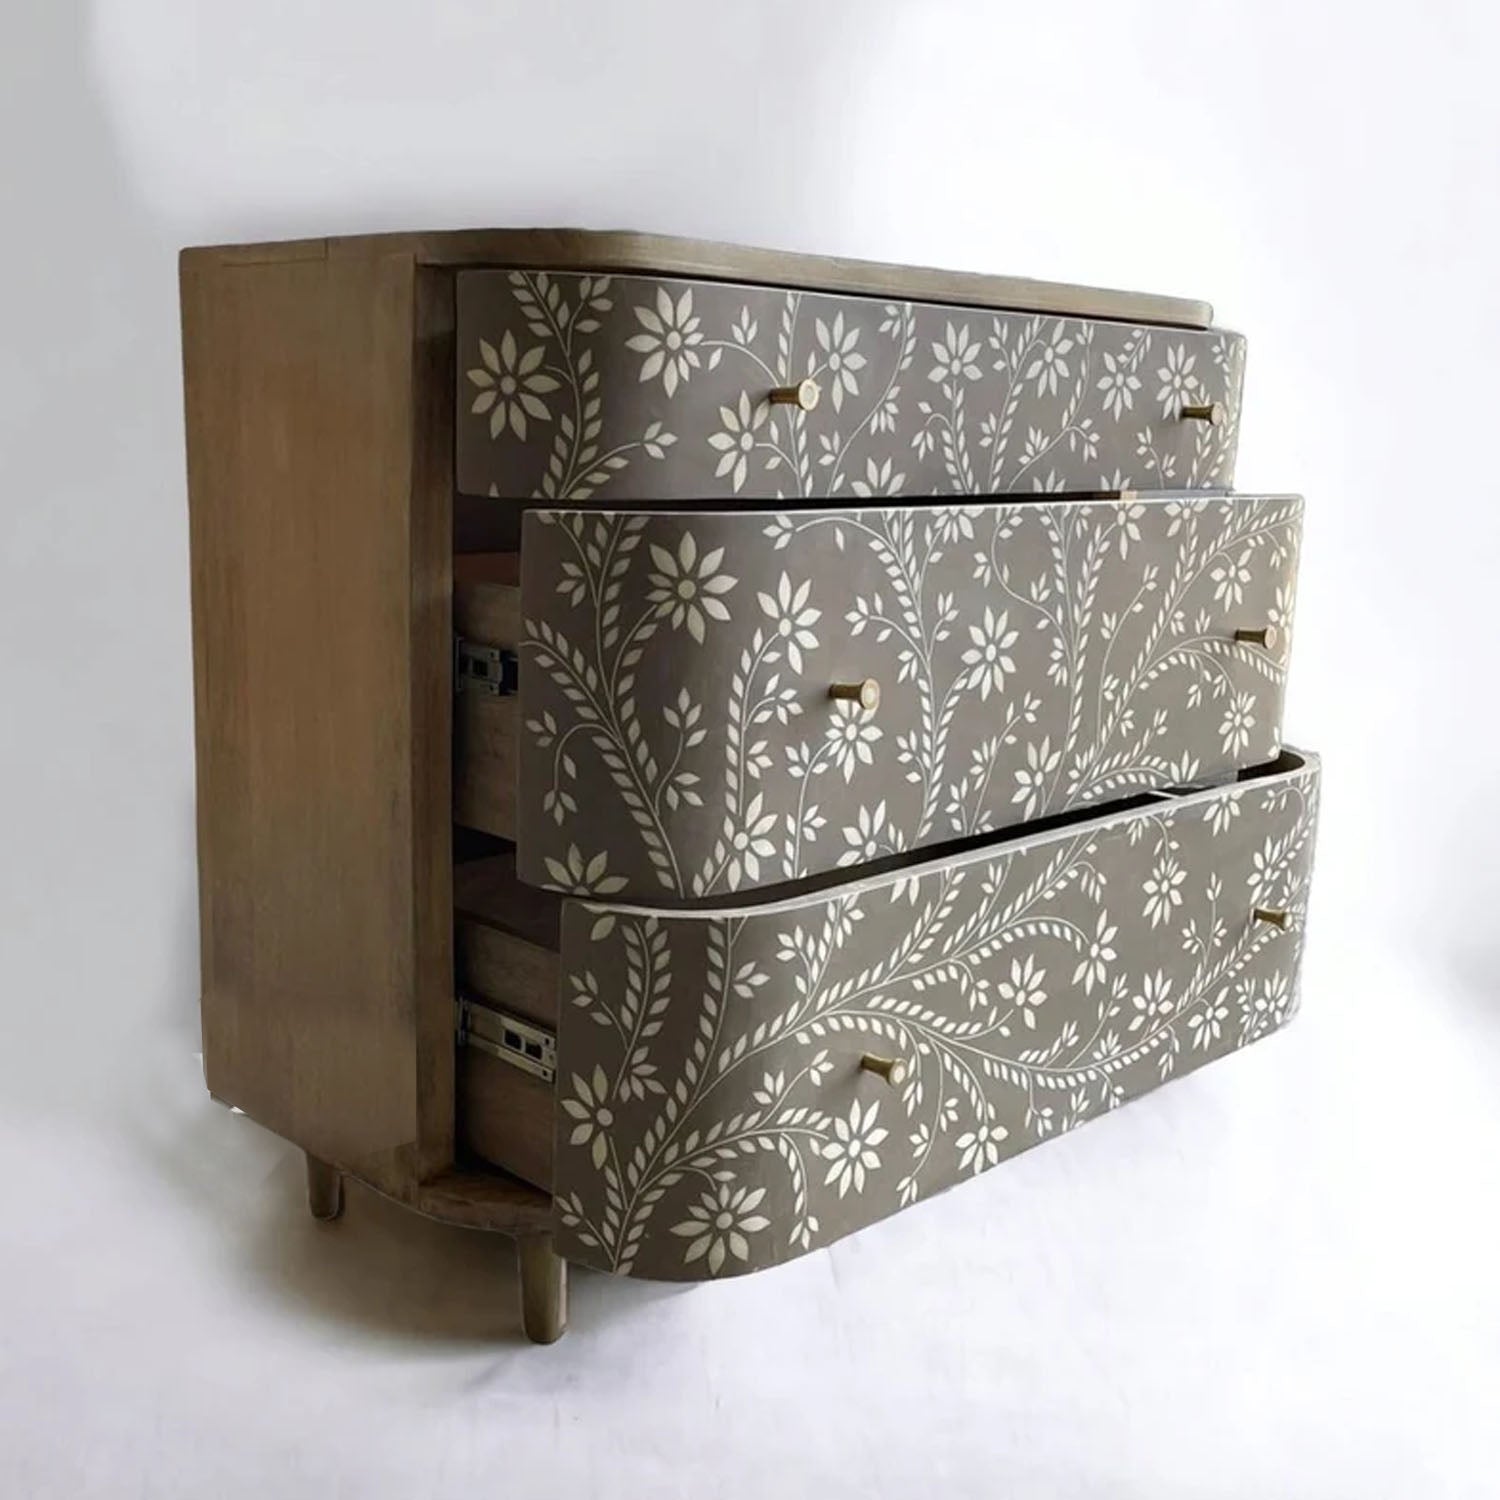 Sunza Bone Inlay Floral Design Chest With Curved Drawers - Notbrand